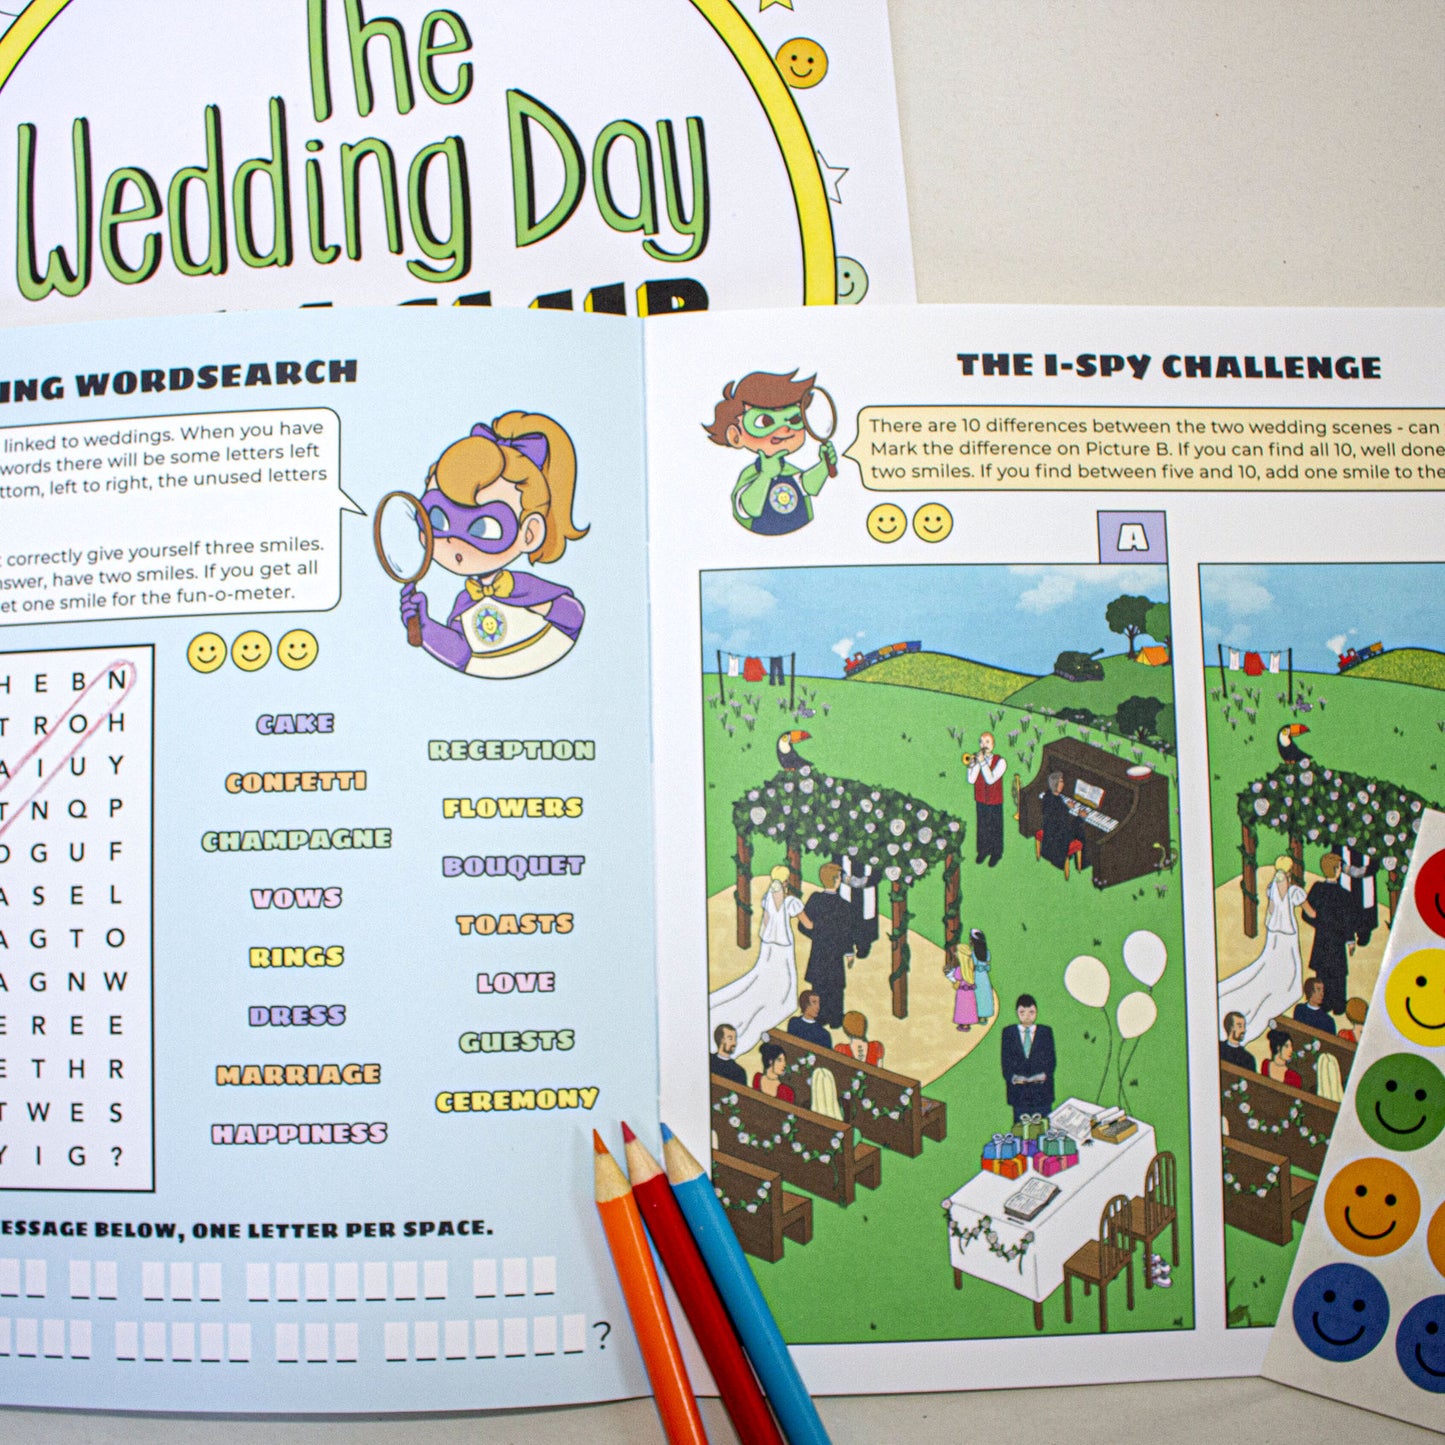 Children's Activity Pack - Welcome to the Wedding Day Fun Club!